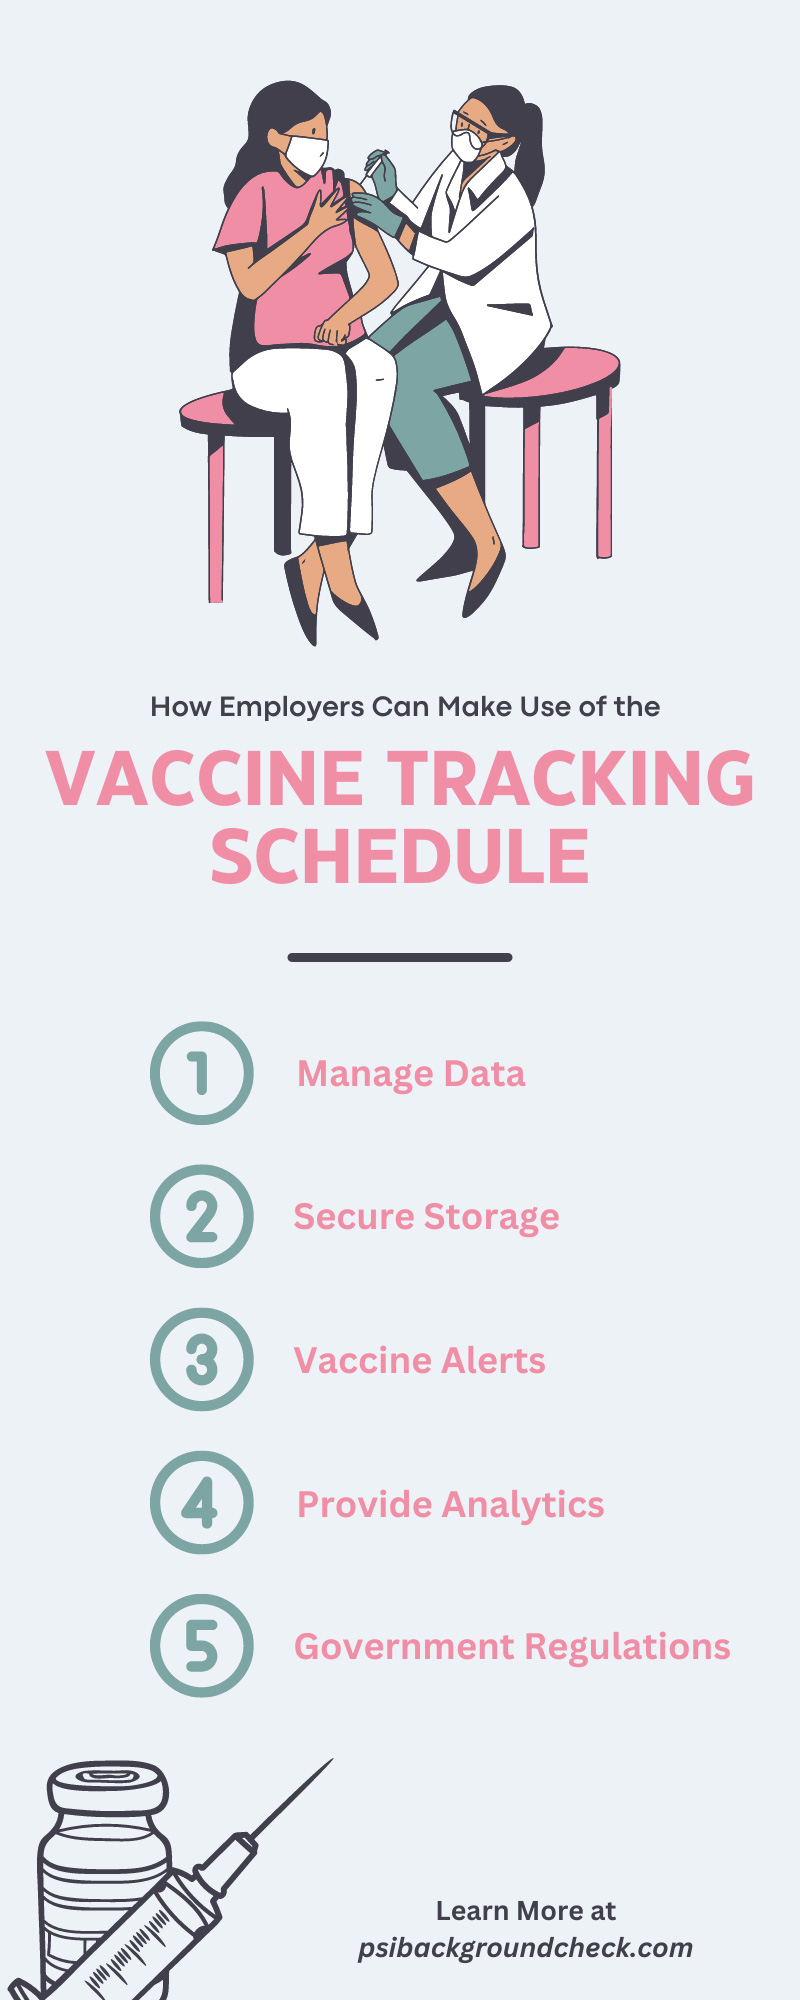 How Employers Can Make Use of the Vaccine Tracking Schedule